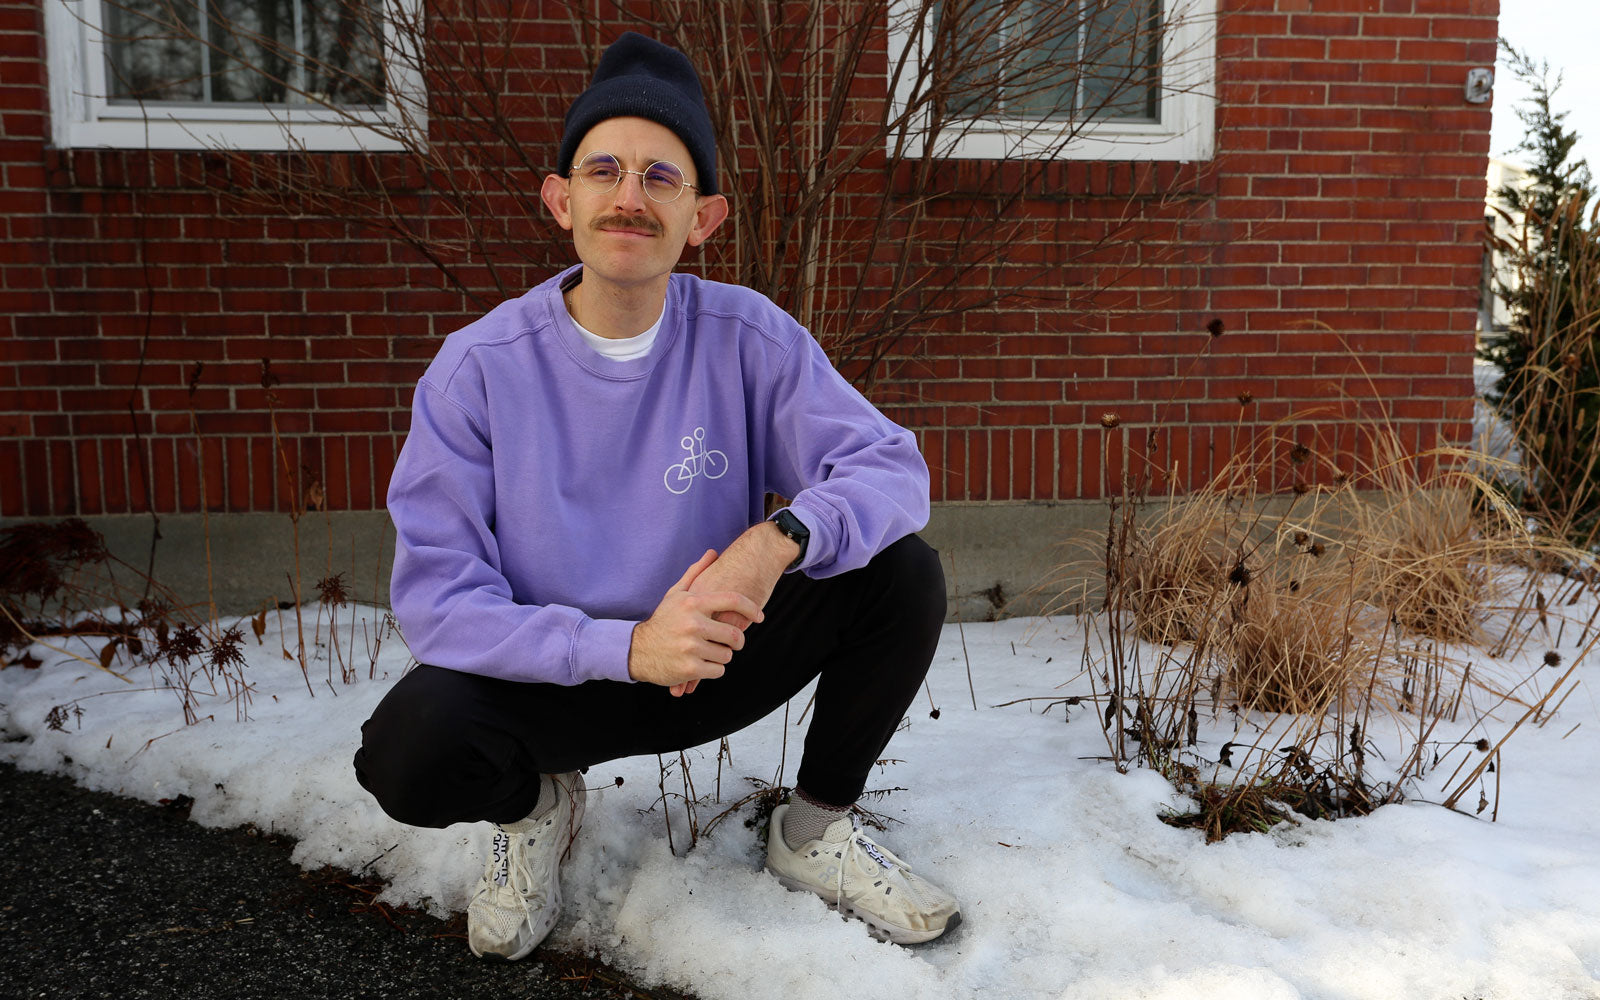 A man squatting by a snow-covered ground outside a brick building, wearing a purple sweatshirt, blue beanie, glasses, and sneakers, smiling at the camera.